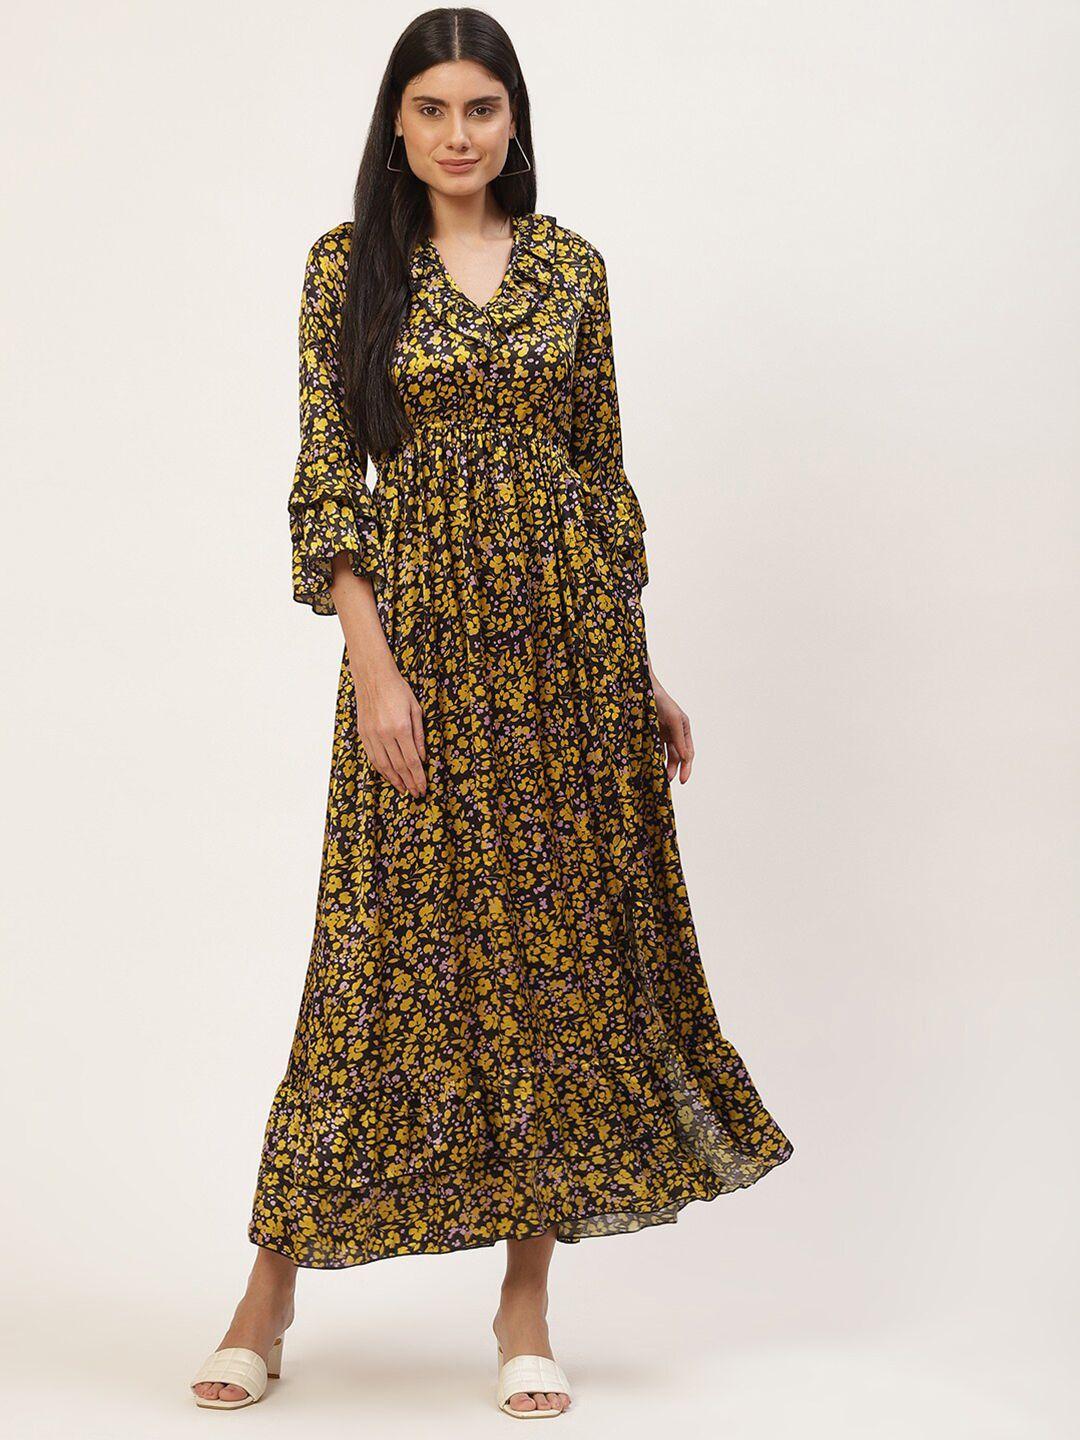 inweave mustard yellow and black floral printed ruffled bell sleeves maxi dress